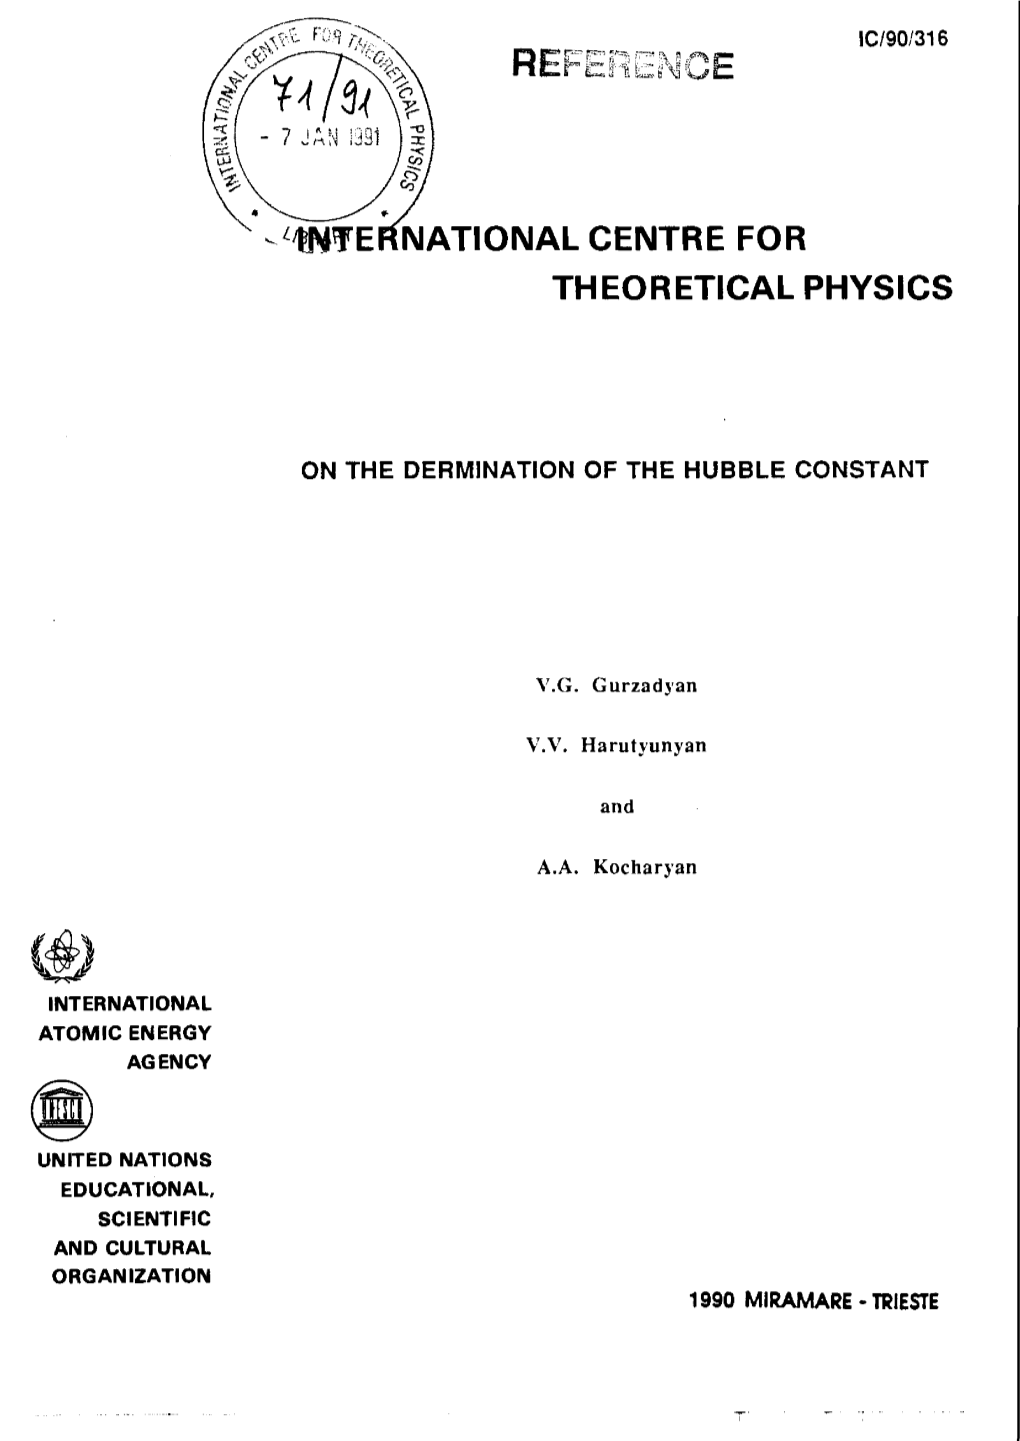 International Centre for Theoretical Physics on the Dermination of The